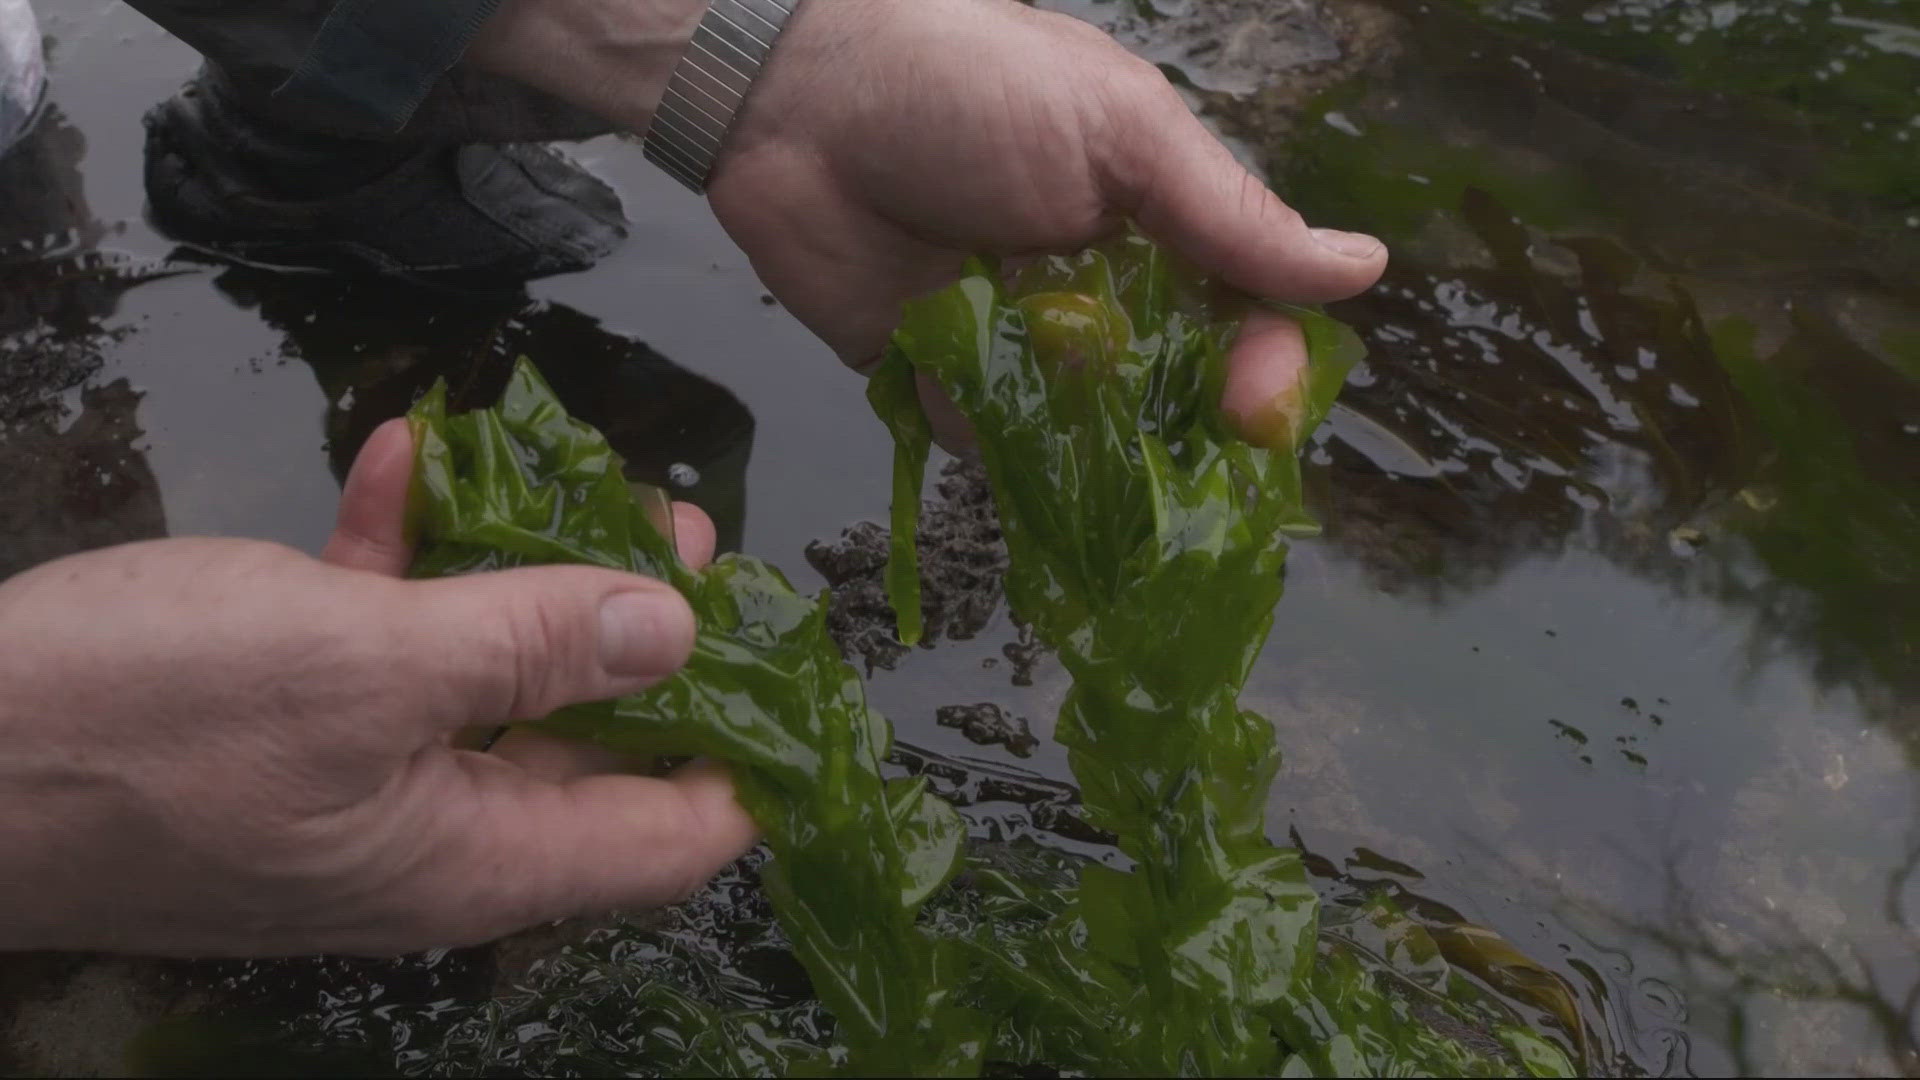 A wild edible expert cooks up a delicious wild foods feast from items foraged from Oregon beaches and forests.